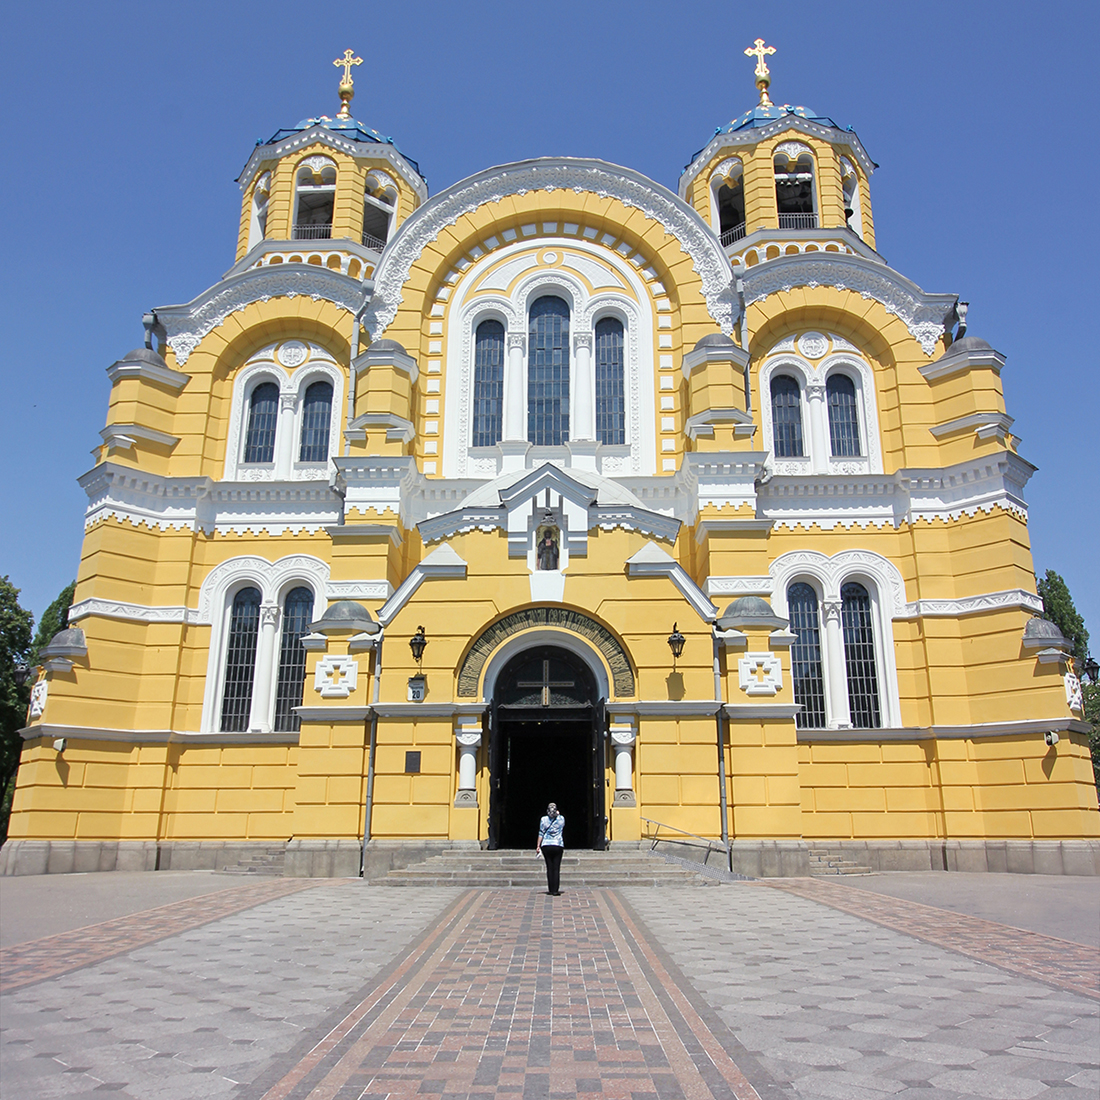 The bright yellow facade of Volodymr's Cathedral in Kyiv, Ukraine